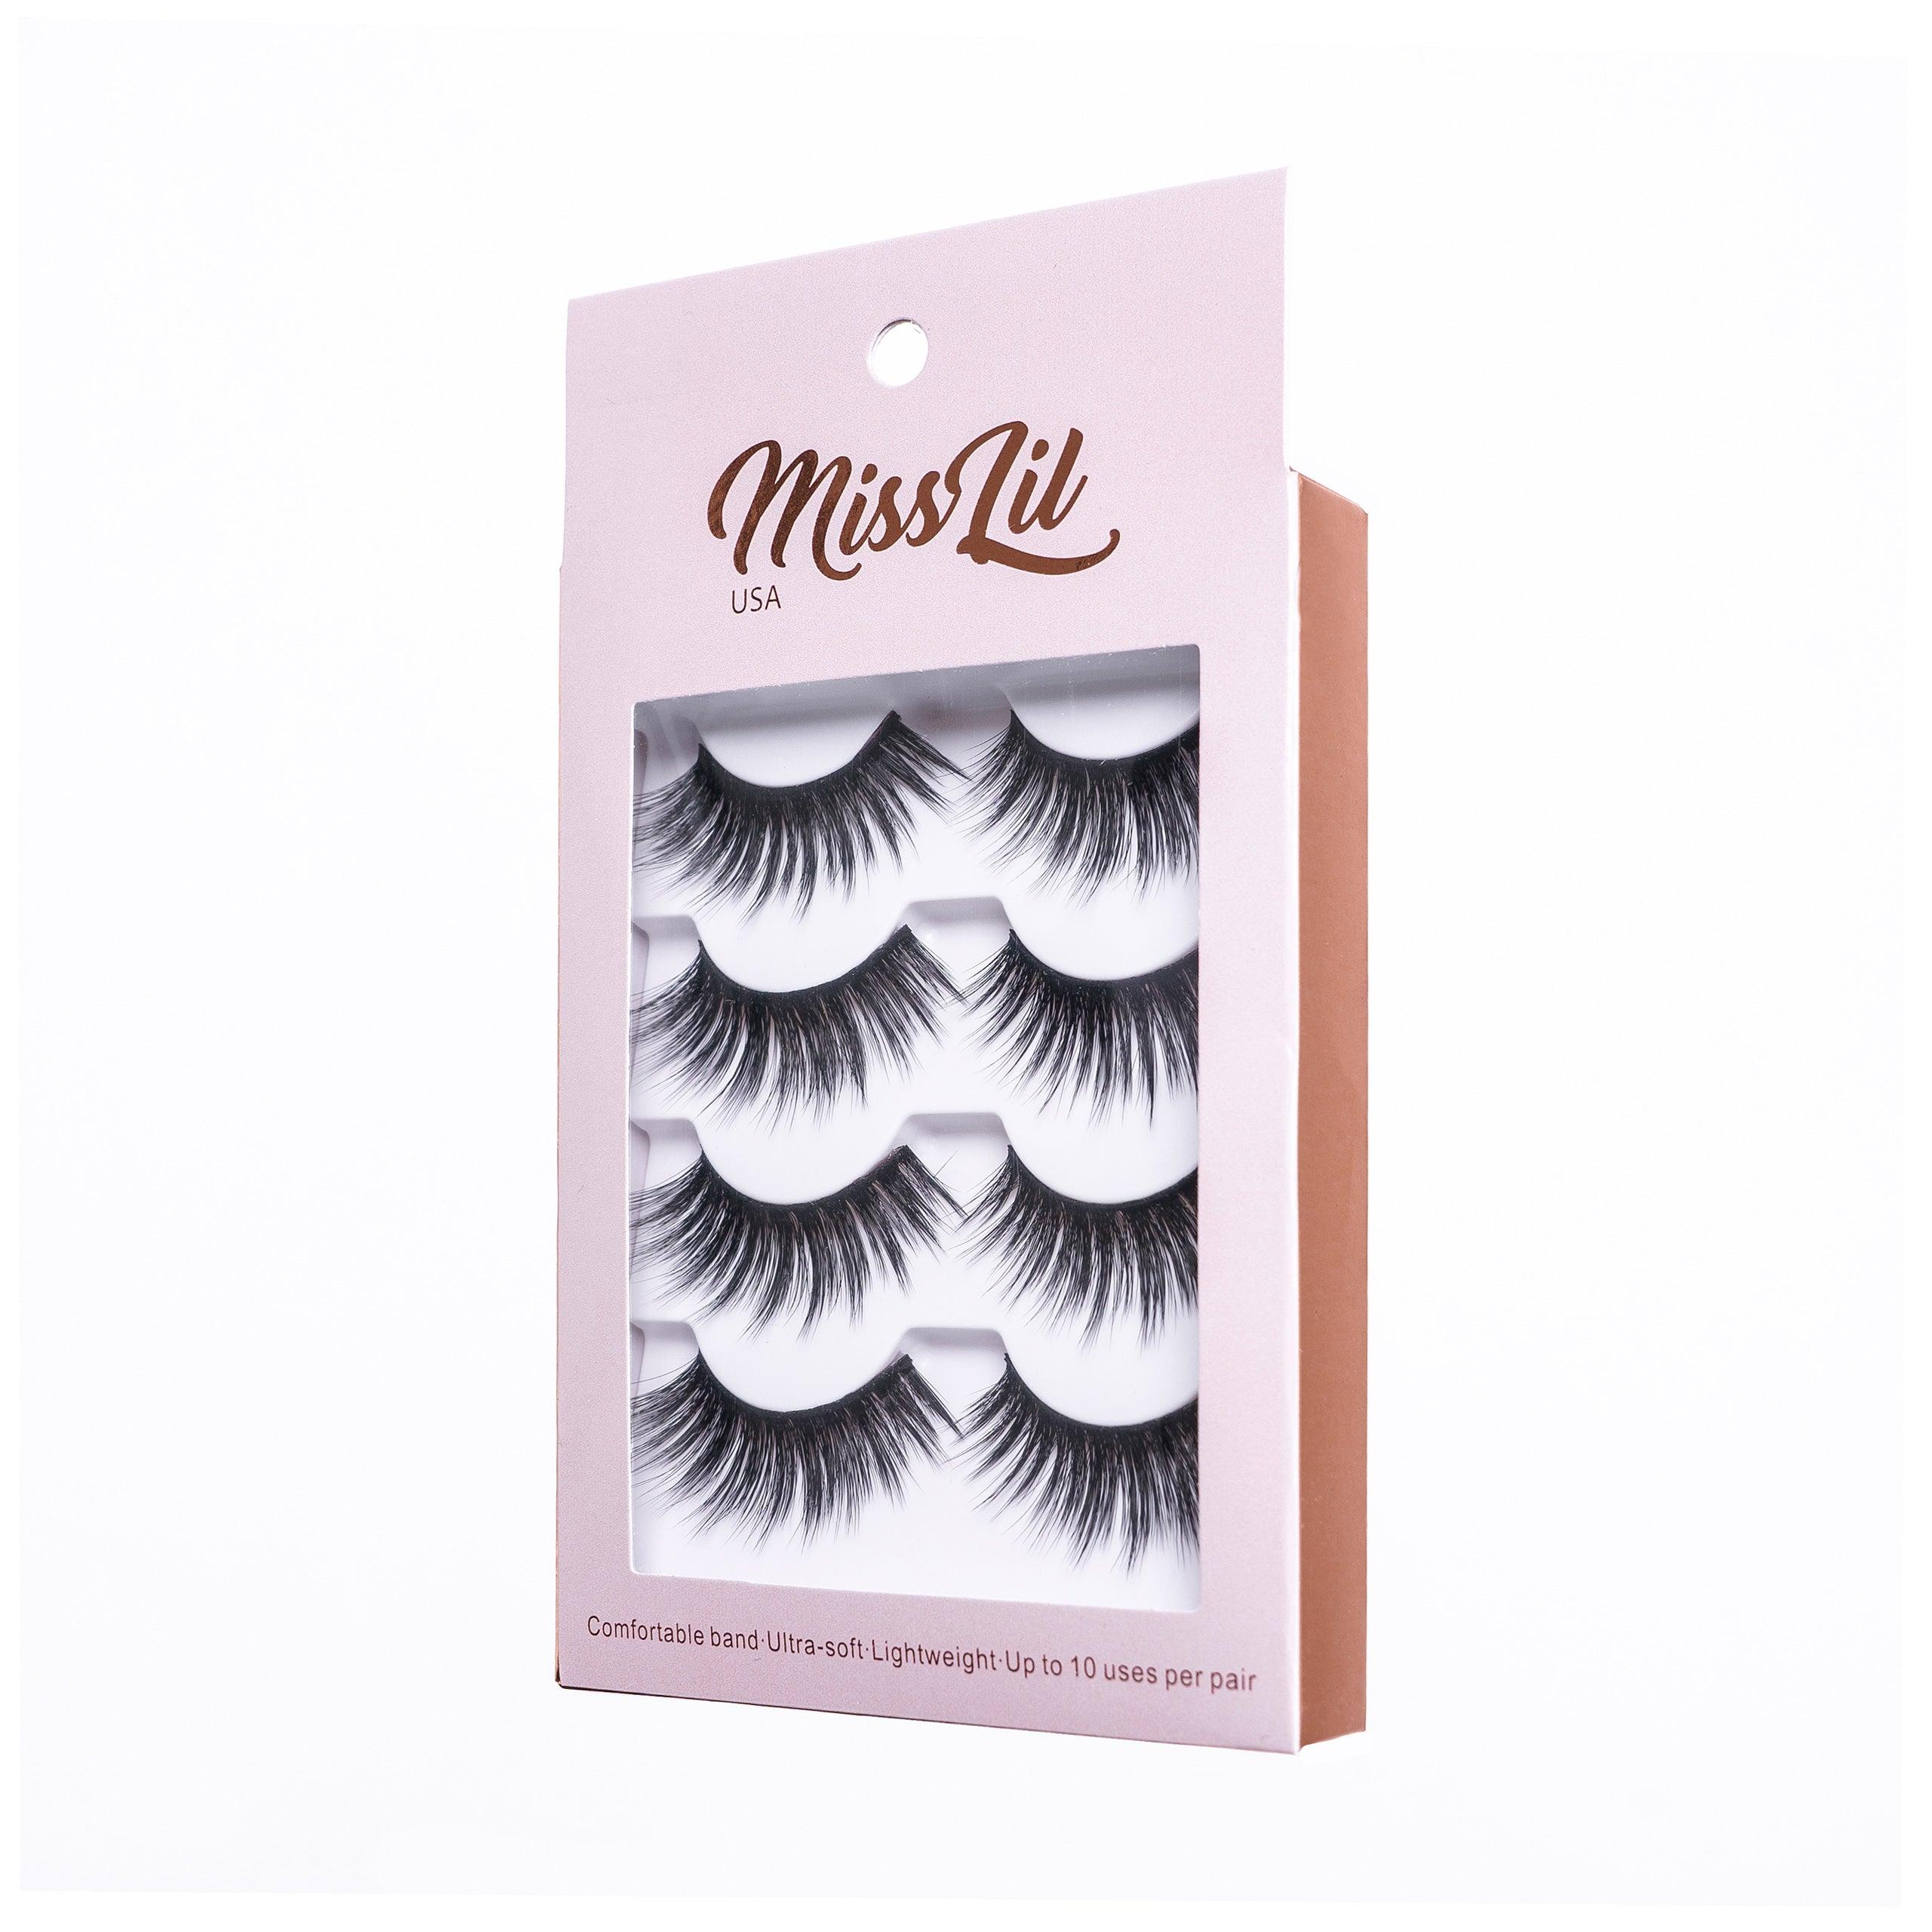 4 Pairs Lashes - Classic Collection #1 (Pack of 12) - Miss Lil USA